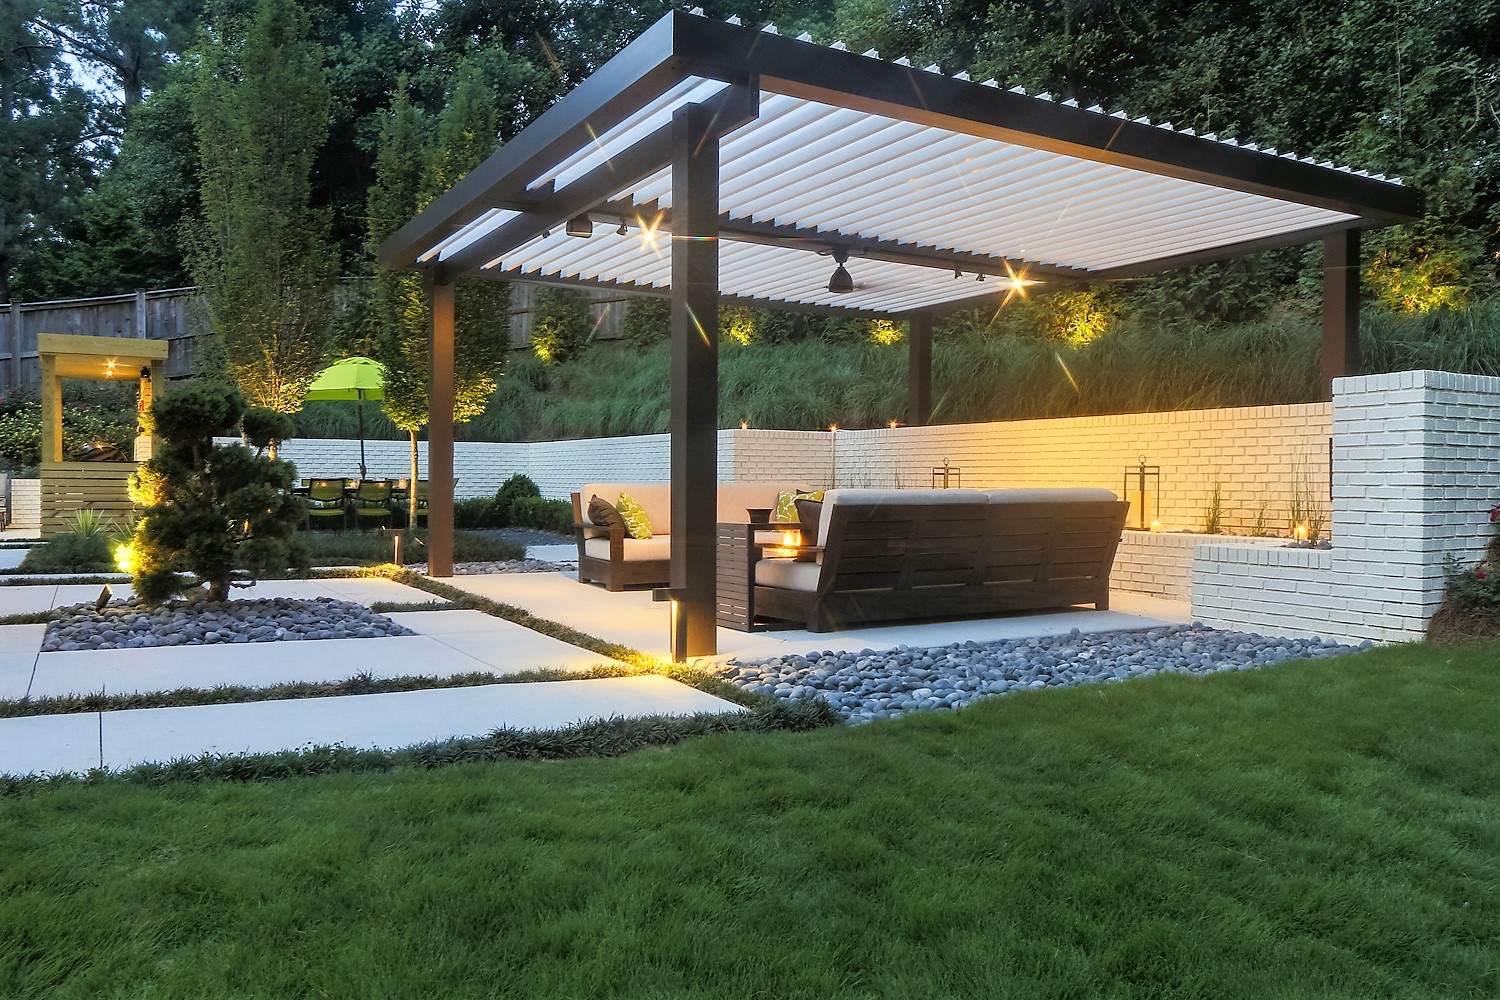 Equinox Louvered roof system patio cover modern and contemporary.